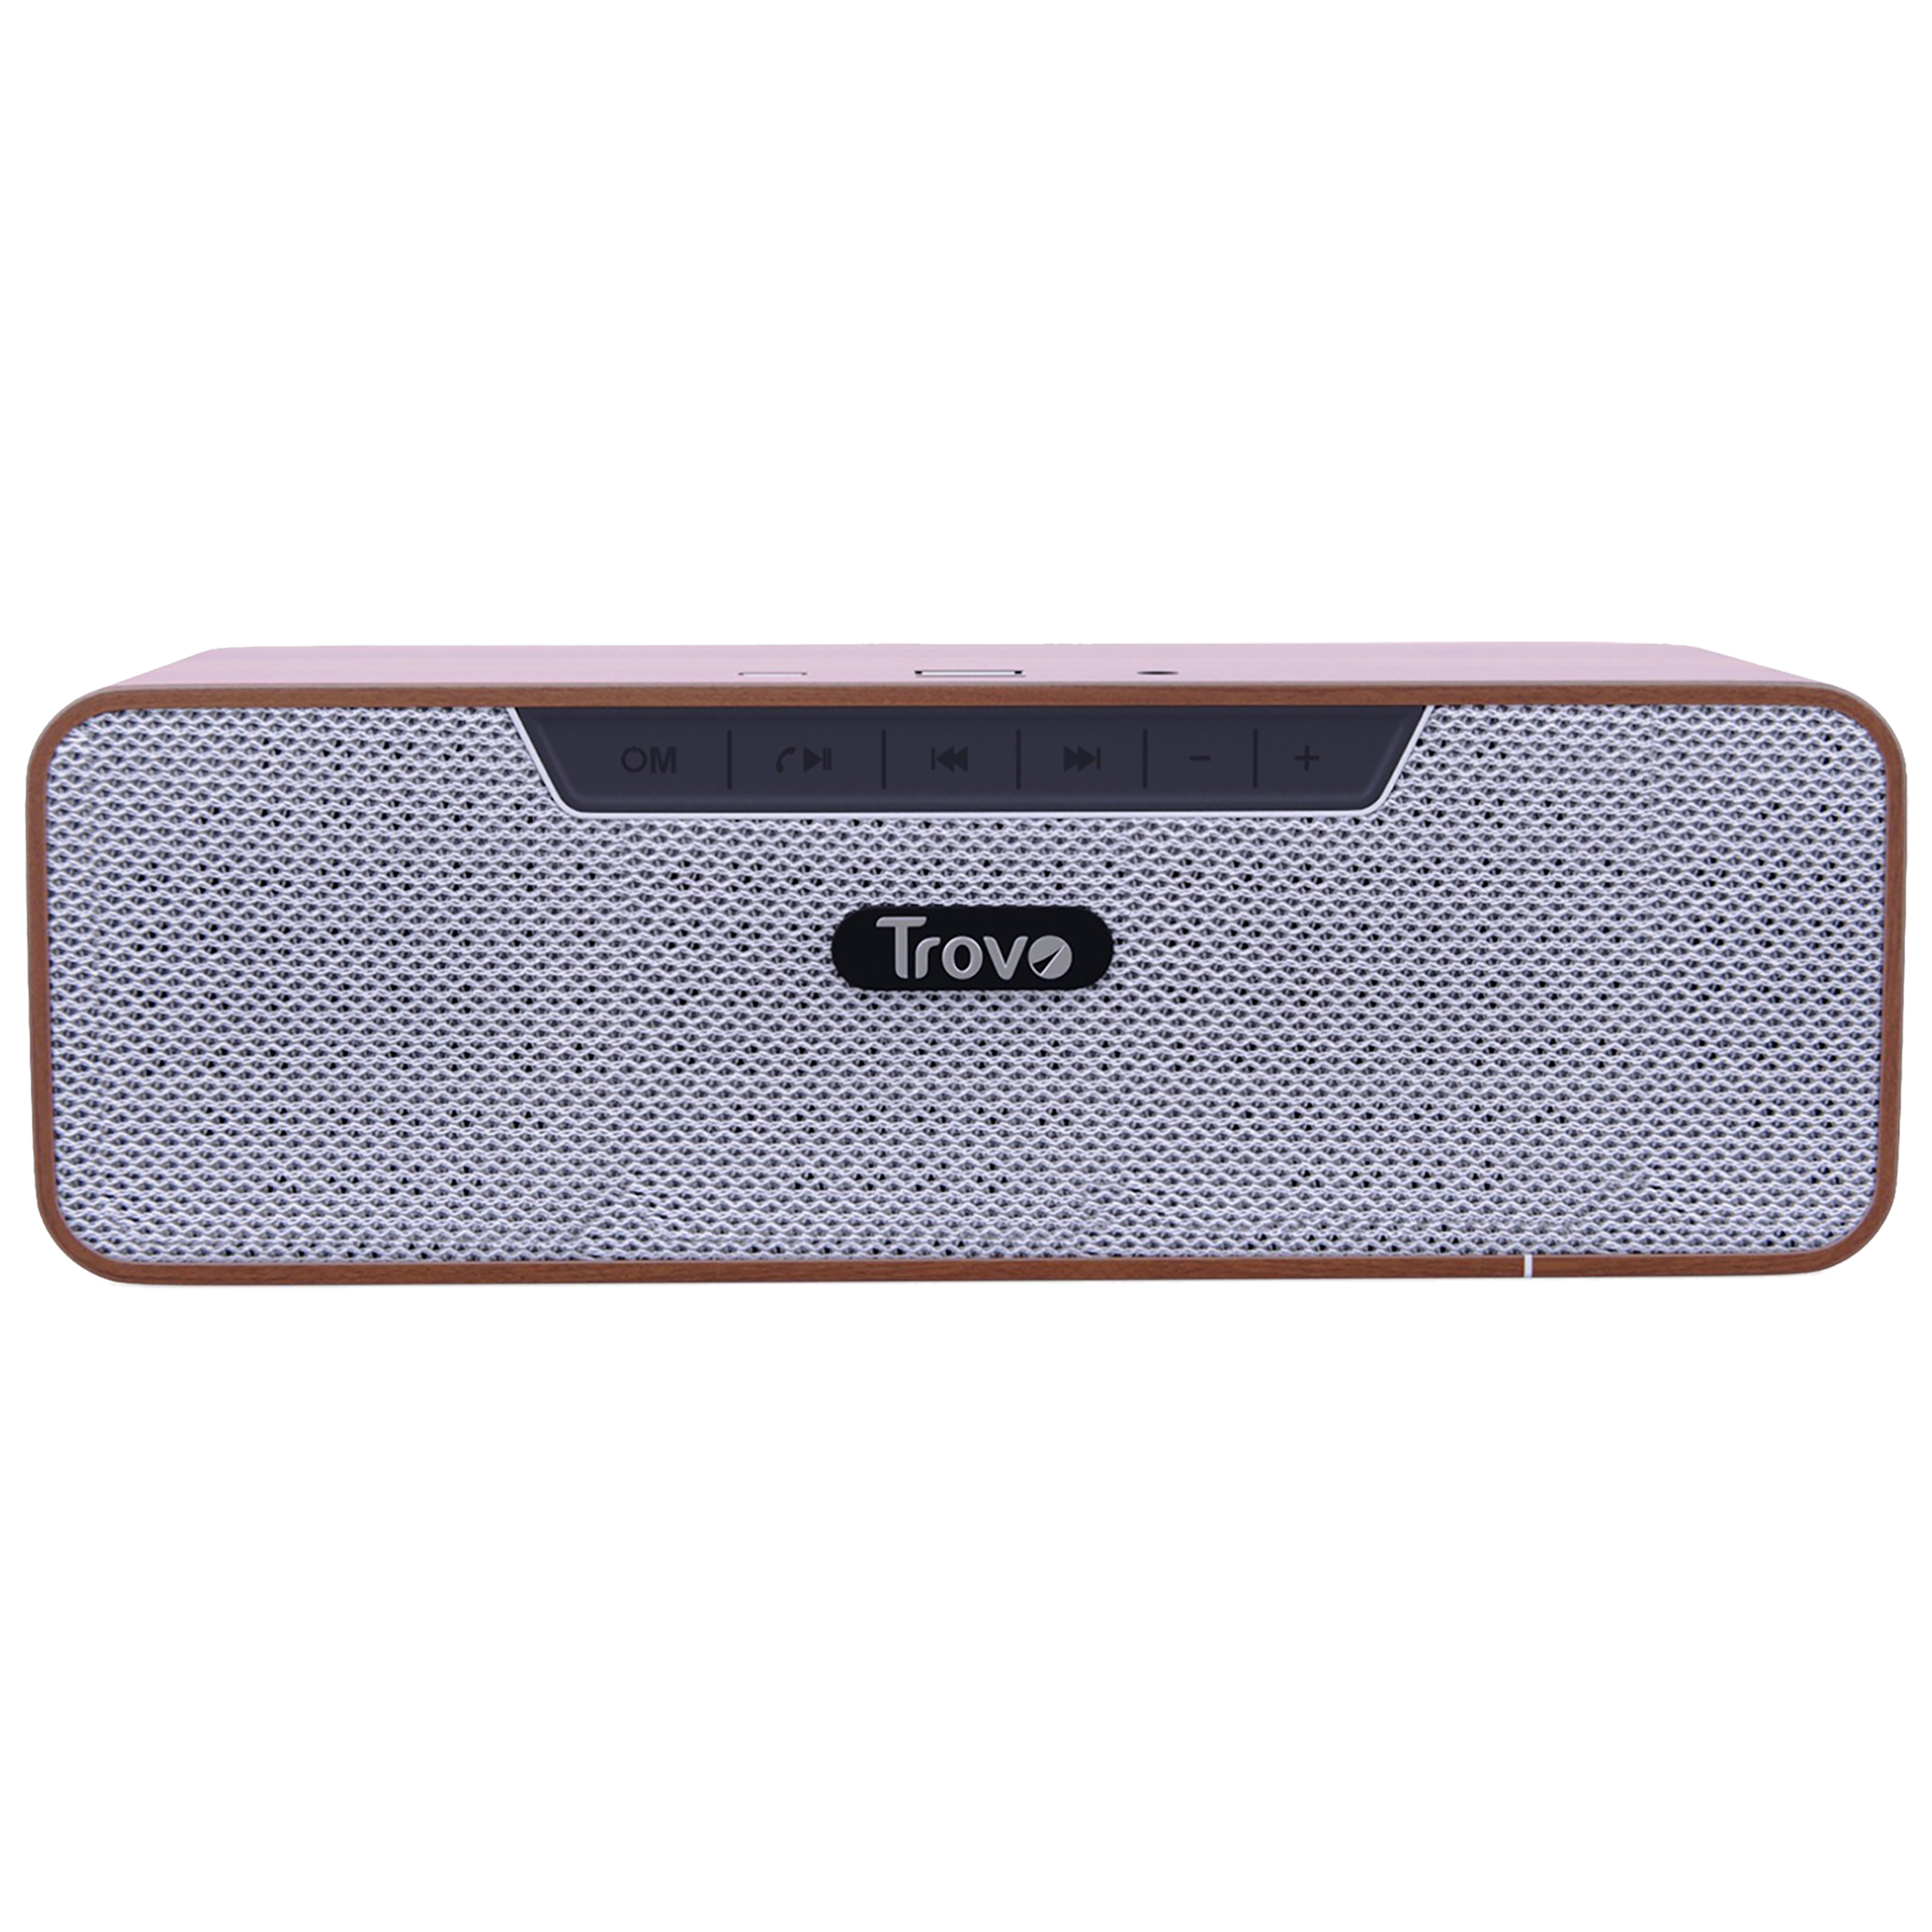 Trovo Wooden 8 Watts Portable Bluetooth Speaker (Wireless Music Streaming, TBS-51, Brown)_1